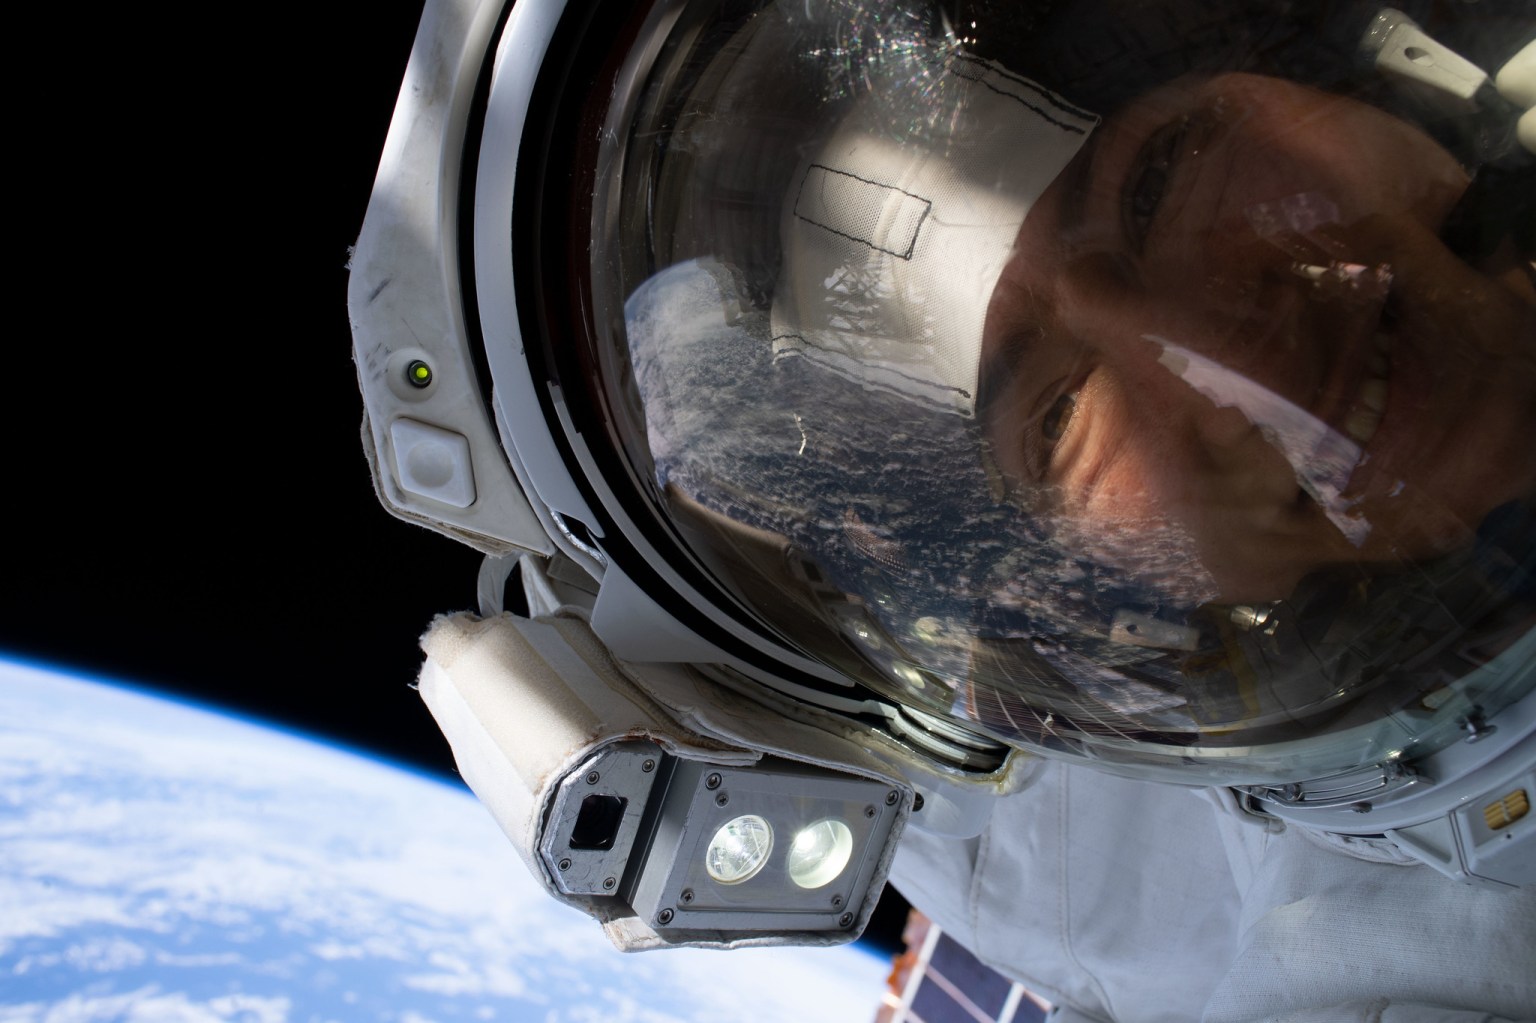 NASA astronaut Christina Koch takes an out-of-this-world "space-selfie" with the Earth behind her.